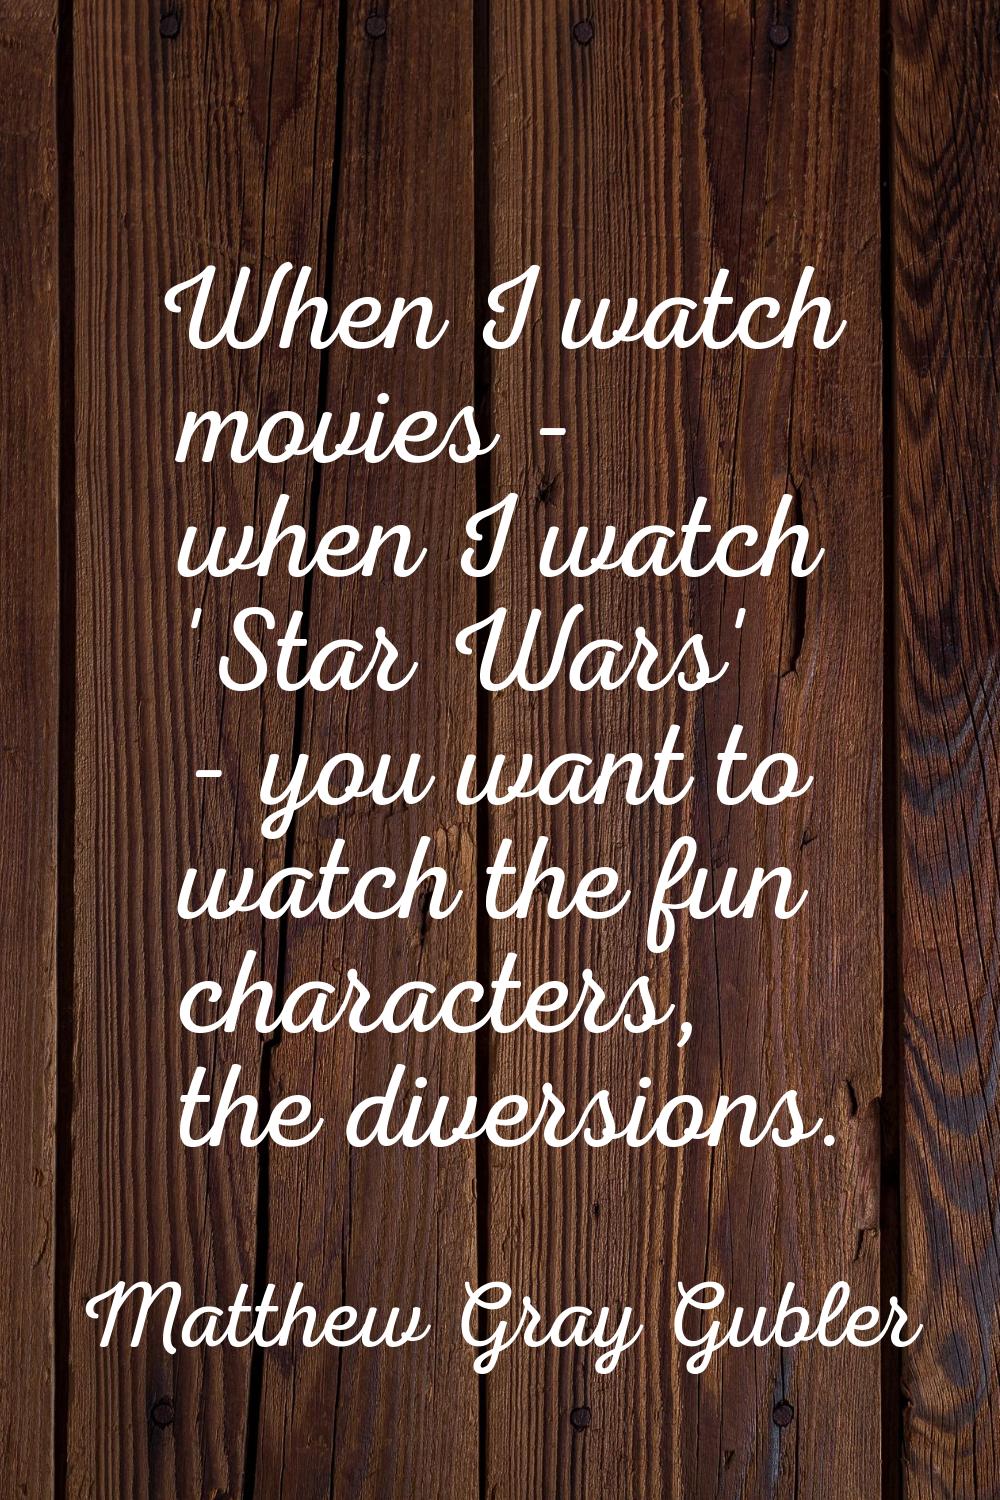 When I watch movies - when I watch 'Star Wars' - you want to watch the fun characters, the diversio